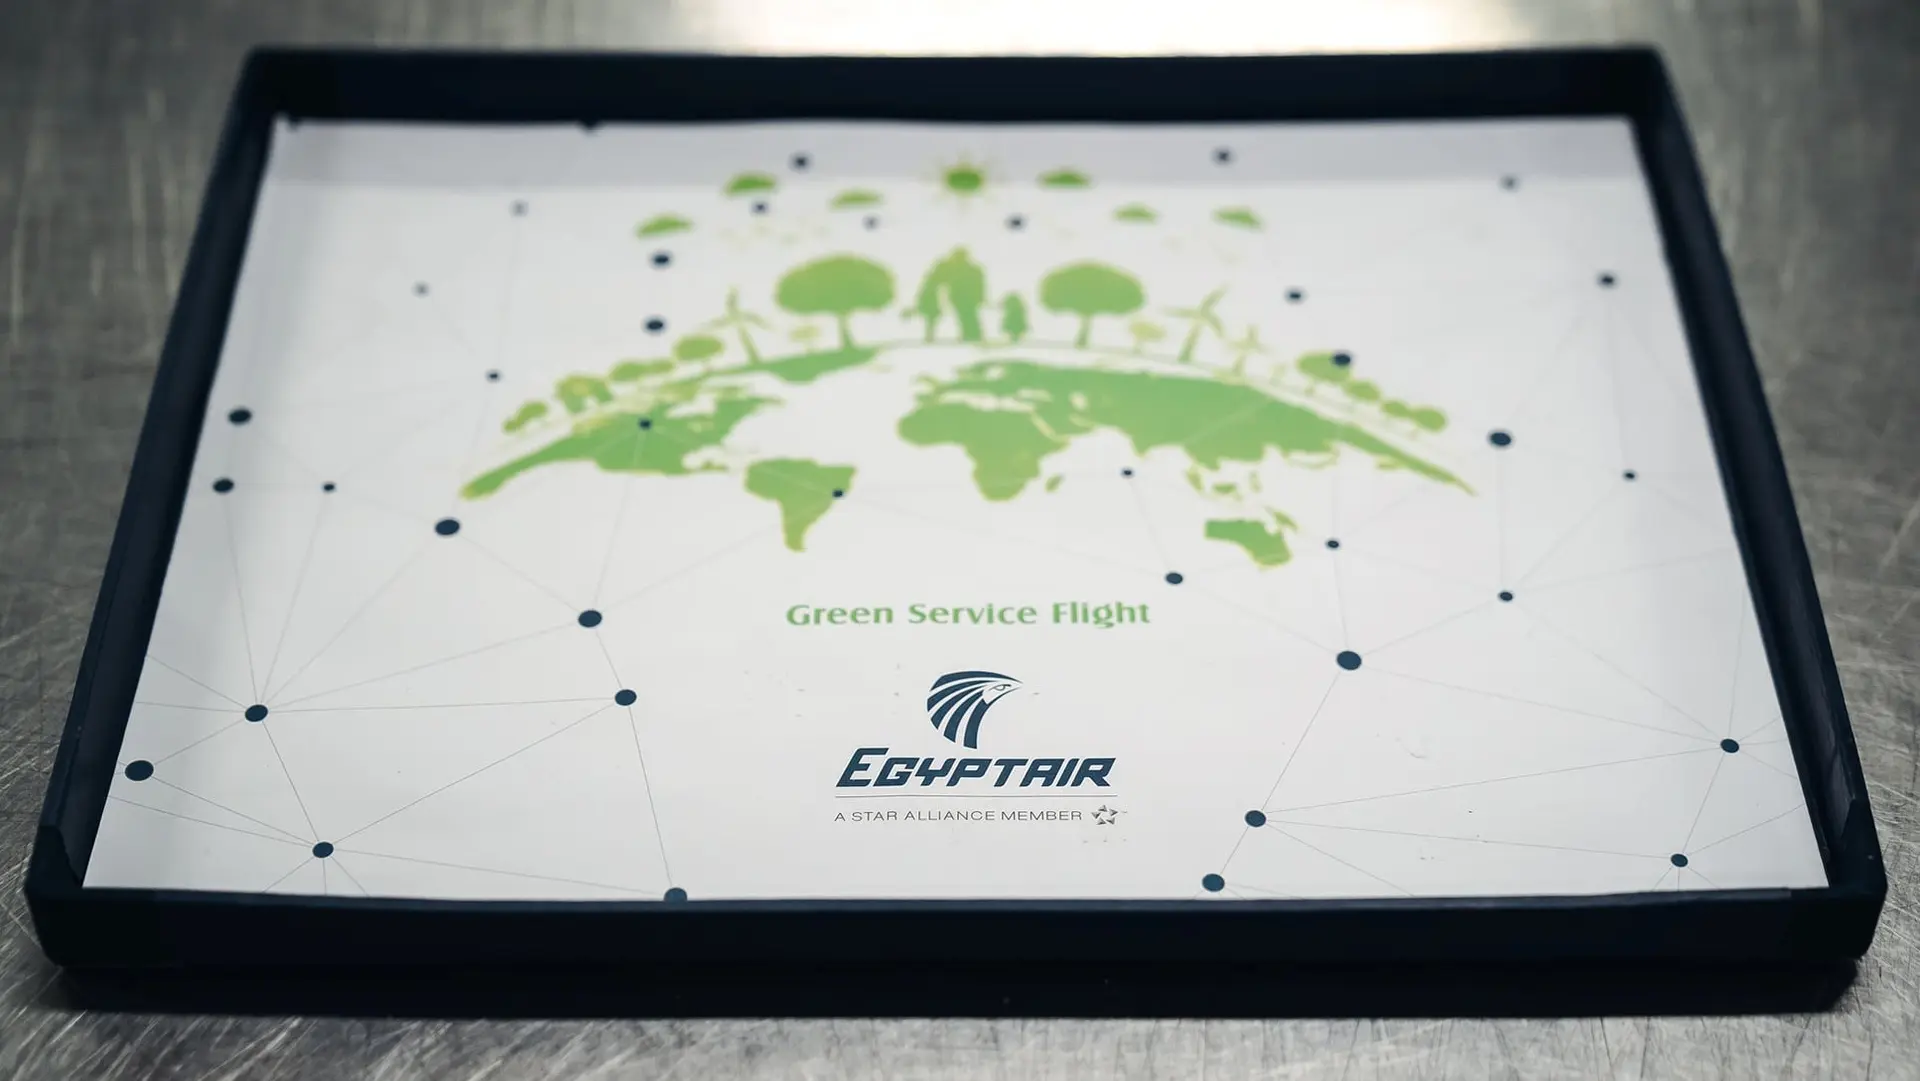 Airline review Sustainability - Egyptair - 1